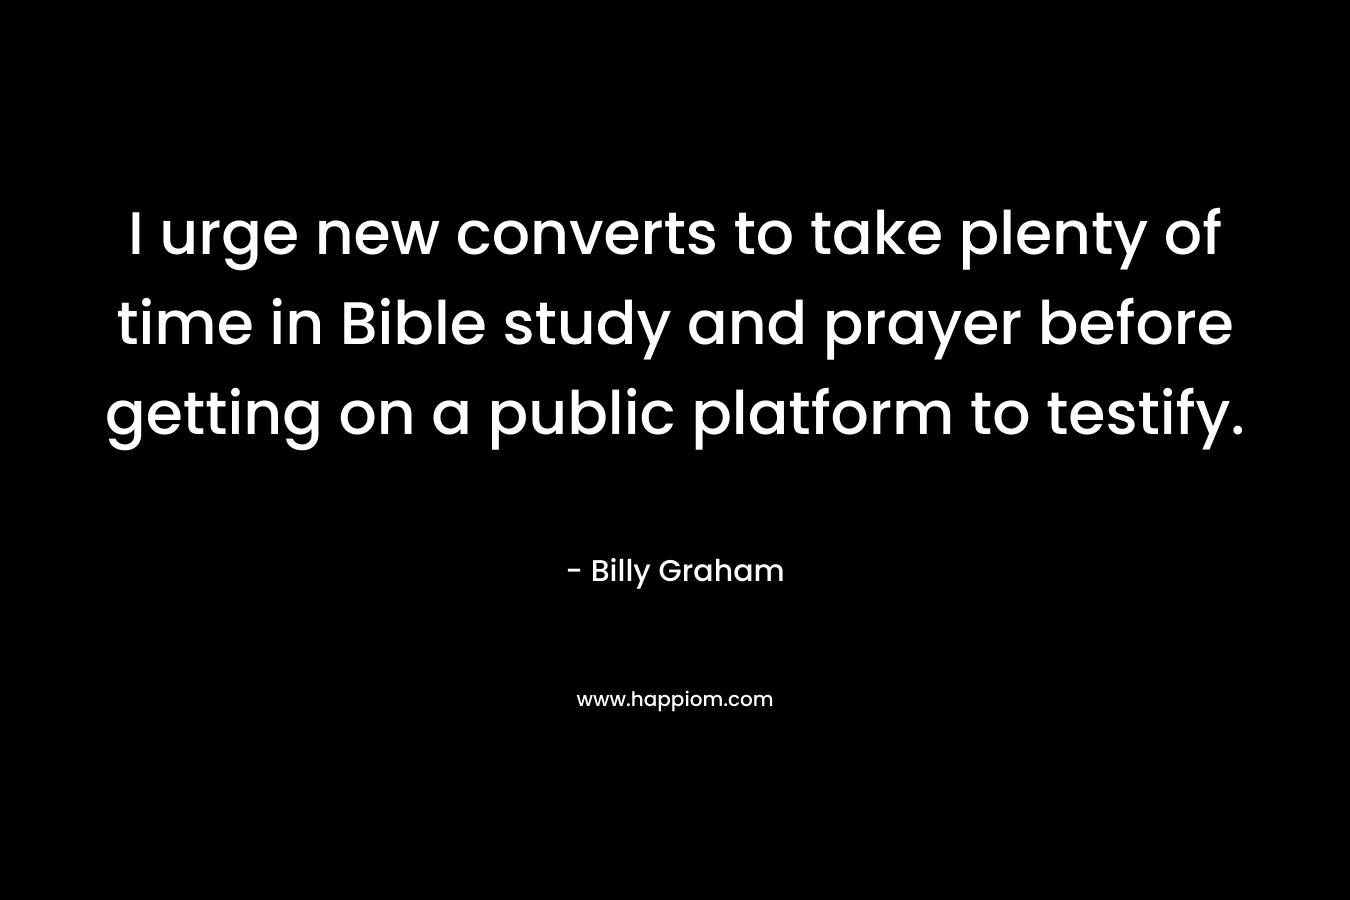 I urge new converts to take plenty of time in Bible study and prayer before getting on a public platform to testify. – Billy Graham